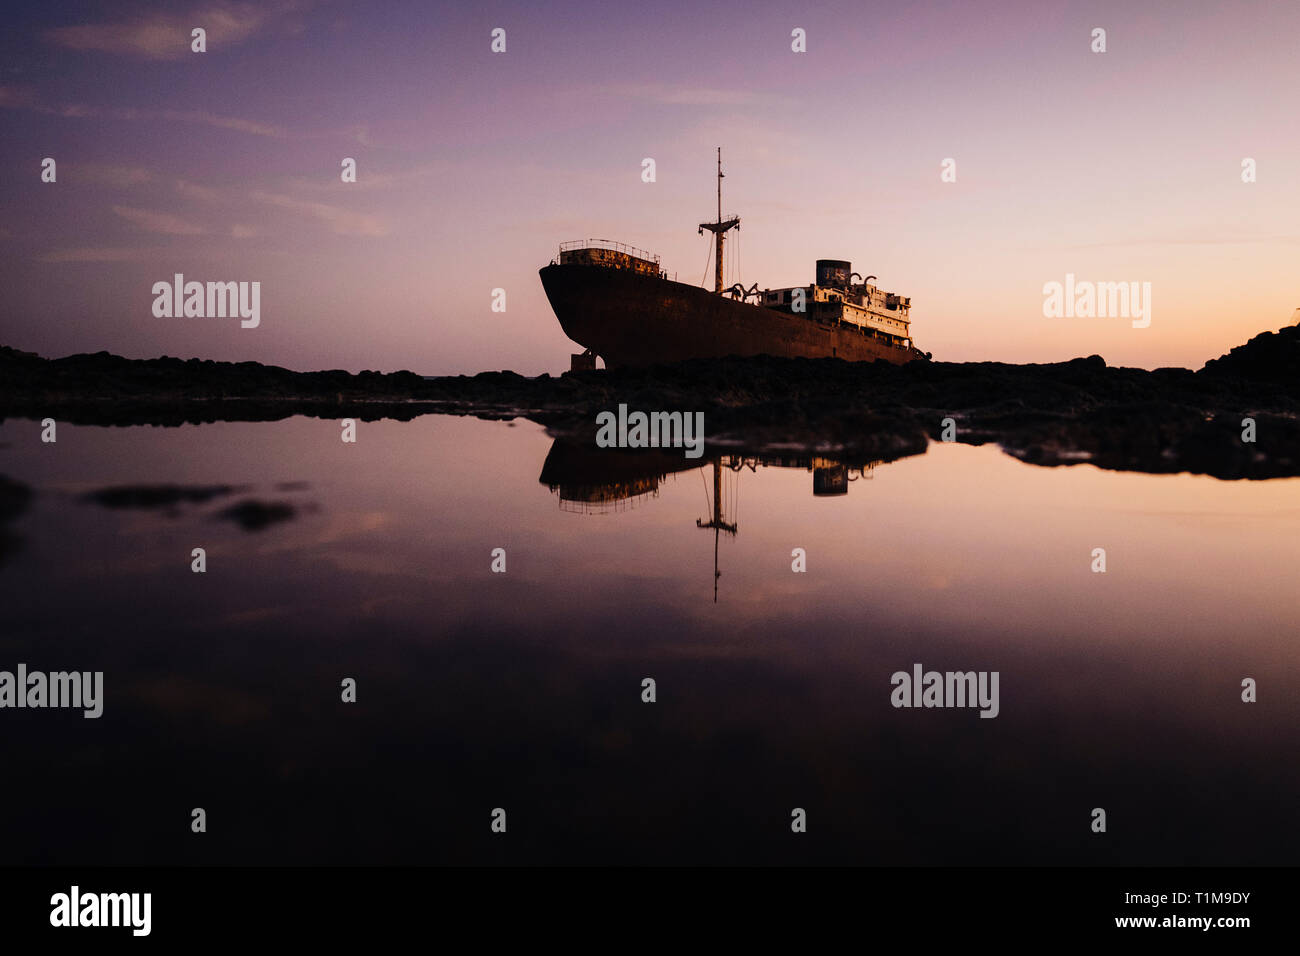 Stranded boat, Costa Teguise, Canary Islands, Spain Stock Photo